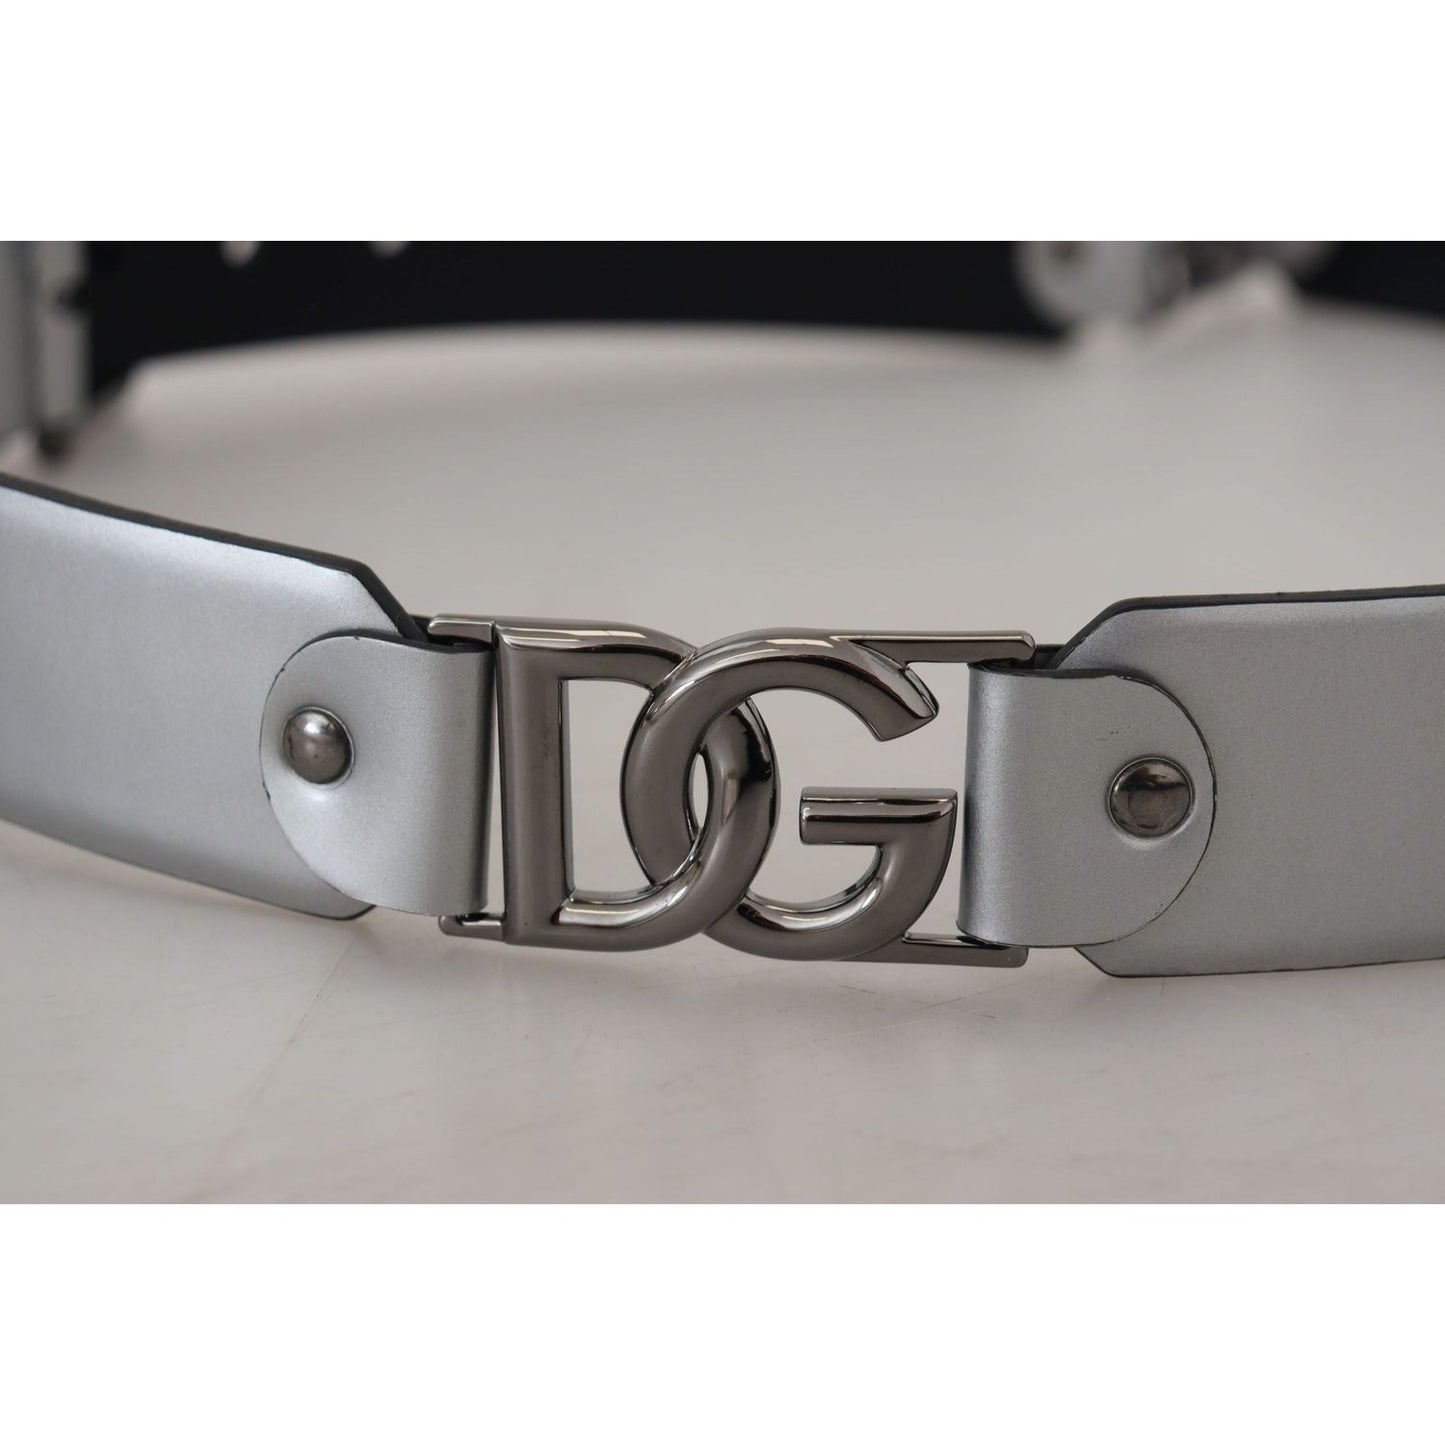 Dolce & Gabbana Chic Silver Leather Belt with Metal Buckle metallic-silver-leather-dg-logo-metal-buckle-belt IMG_2258-scaled-dc64eb20-33e.jpg